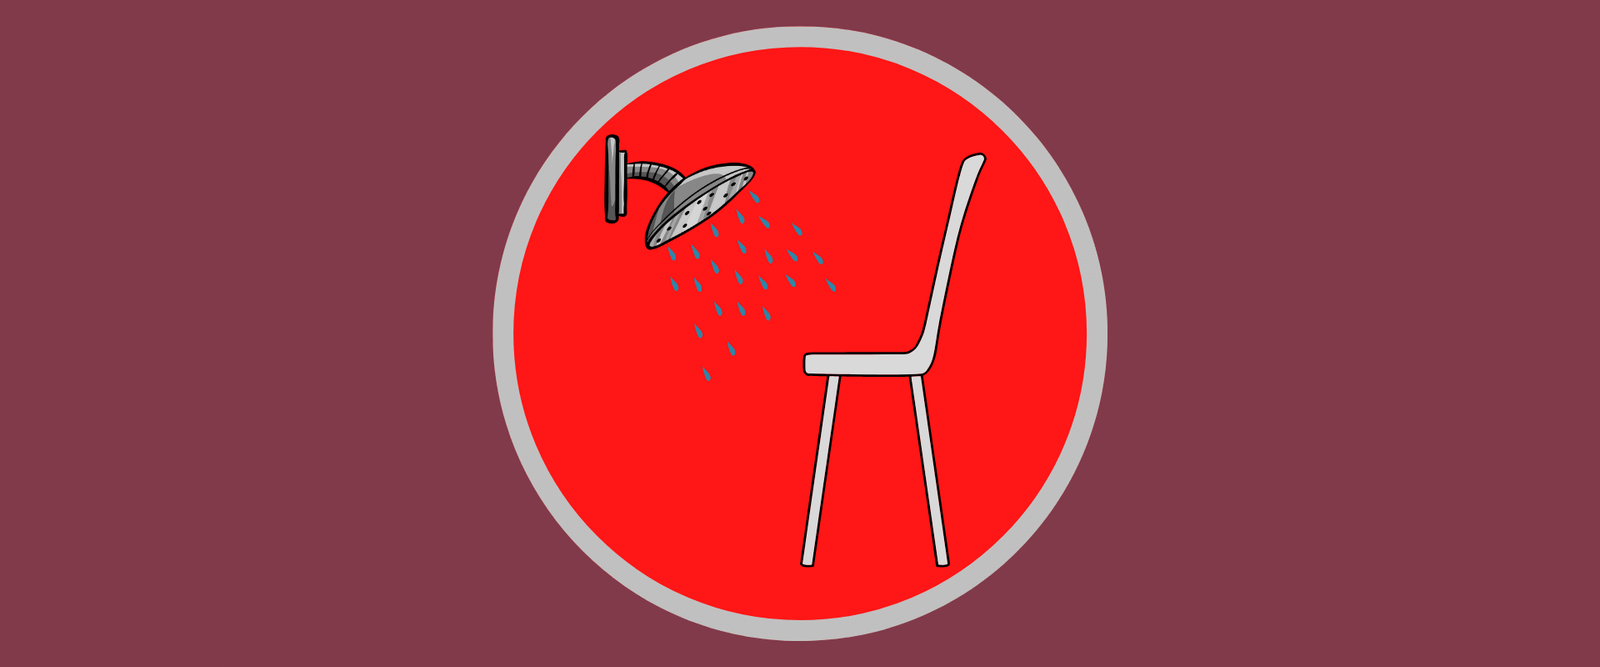 What Are The Benefits Of A Shower Chair?